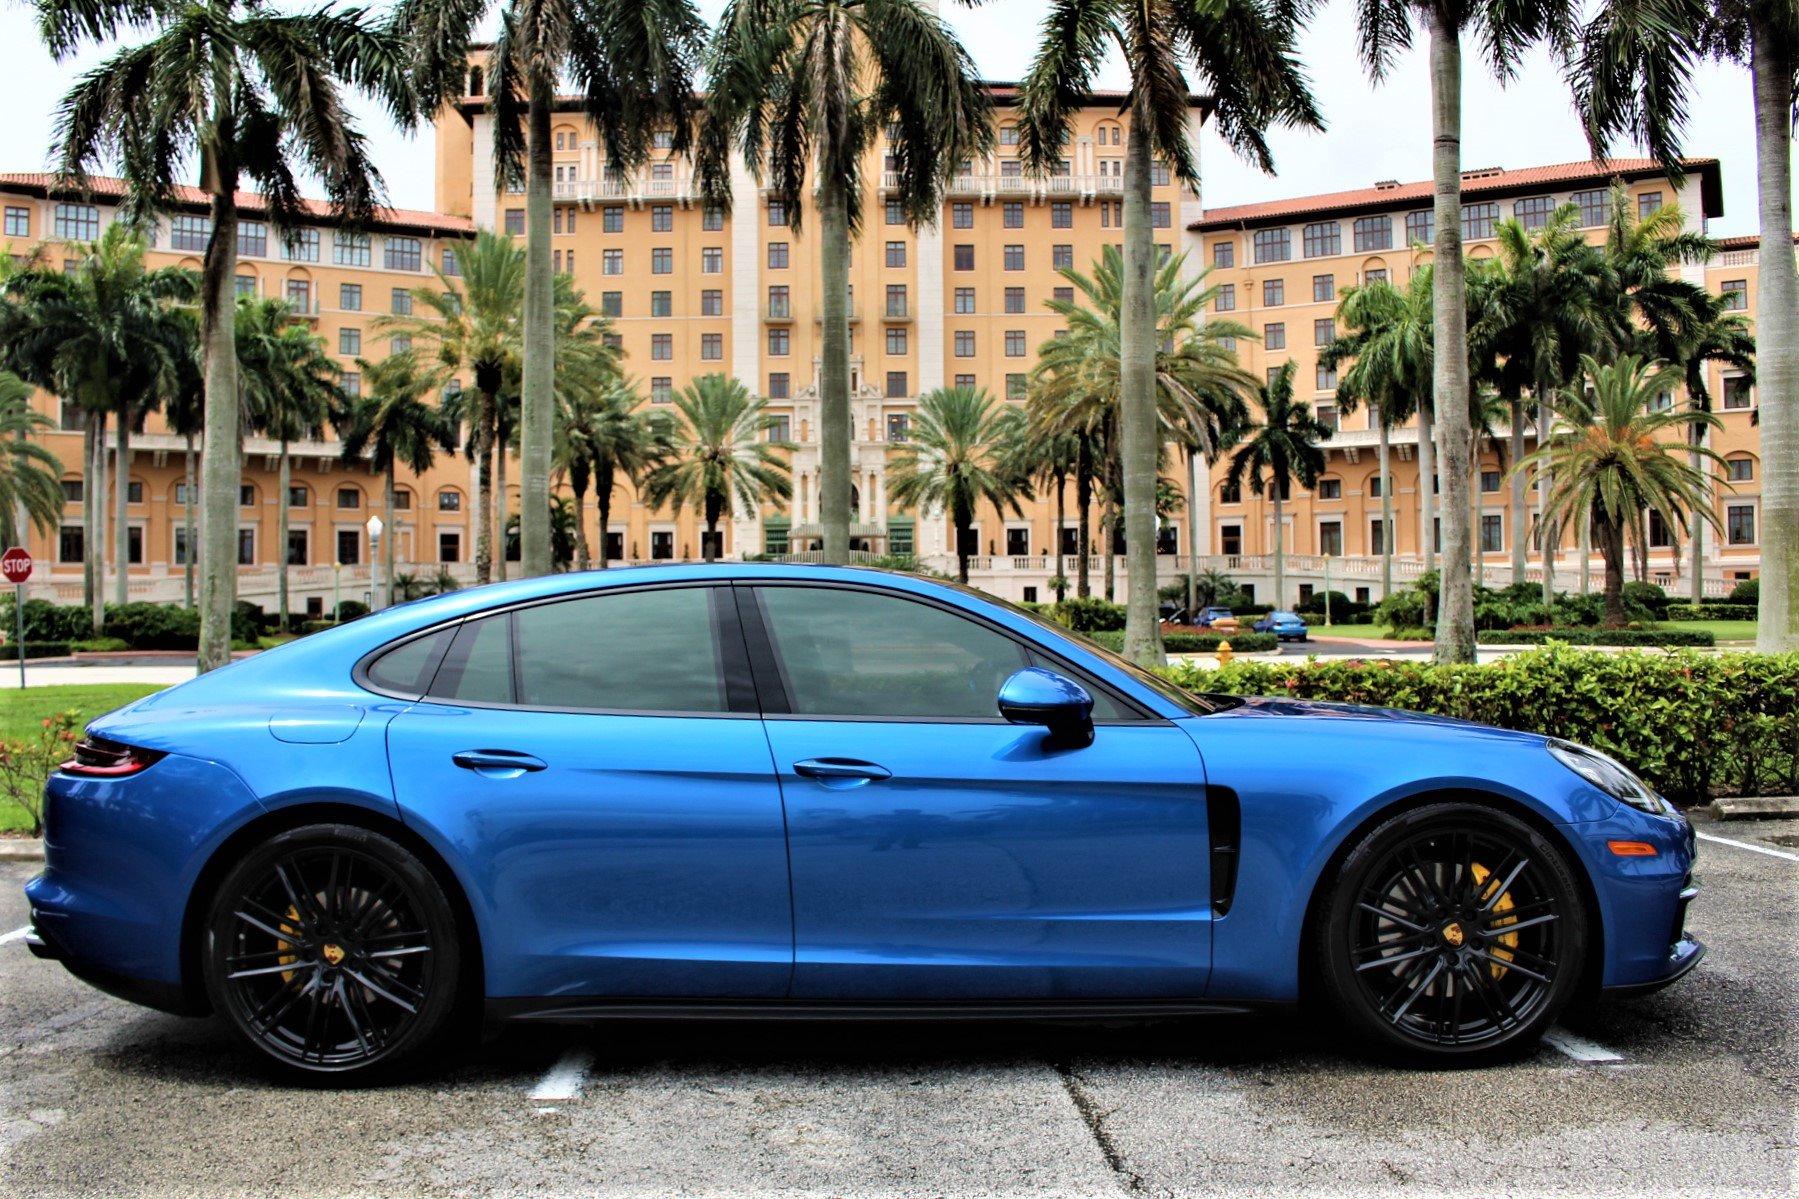 Used 2017 Porsche Panamera 4S for sale Sold at The Gables Sports Cars in Miami FL 33146 4